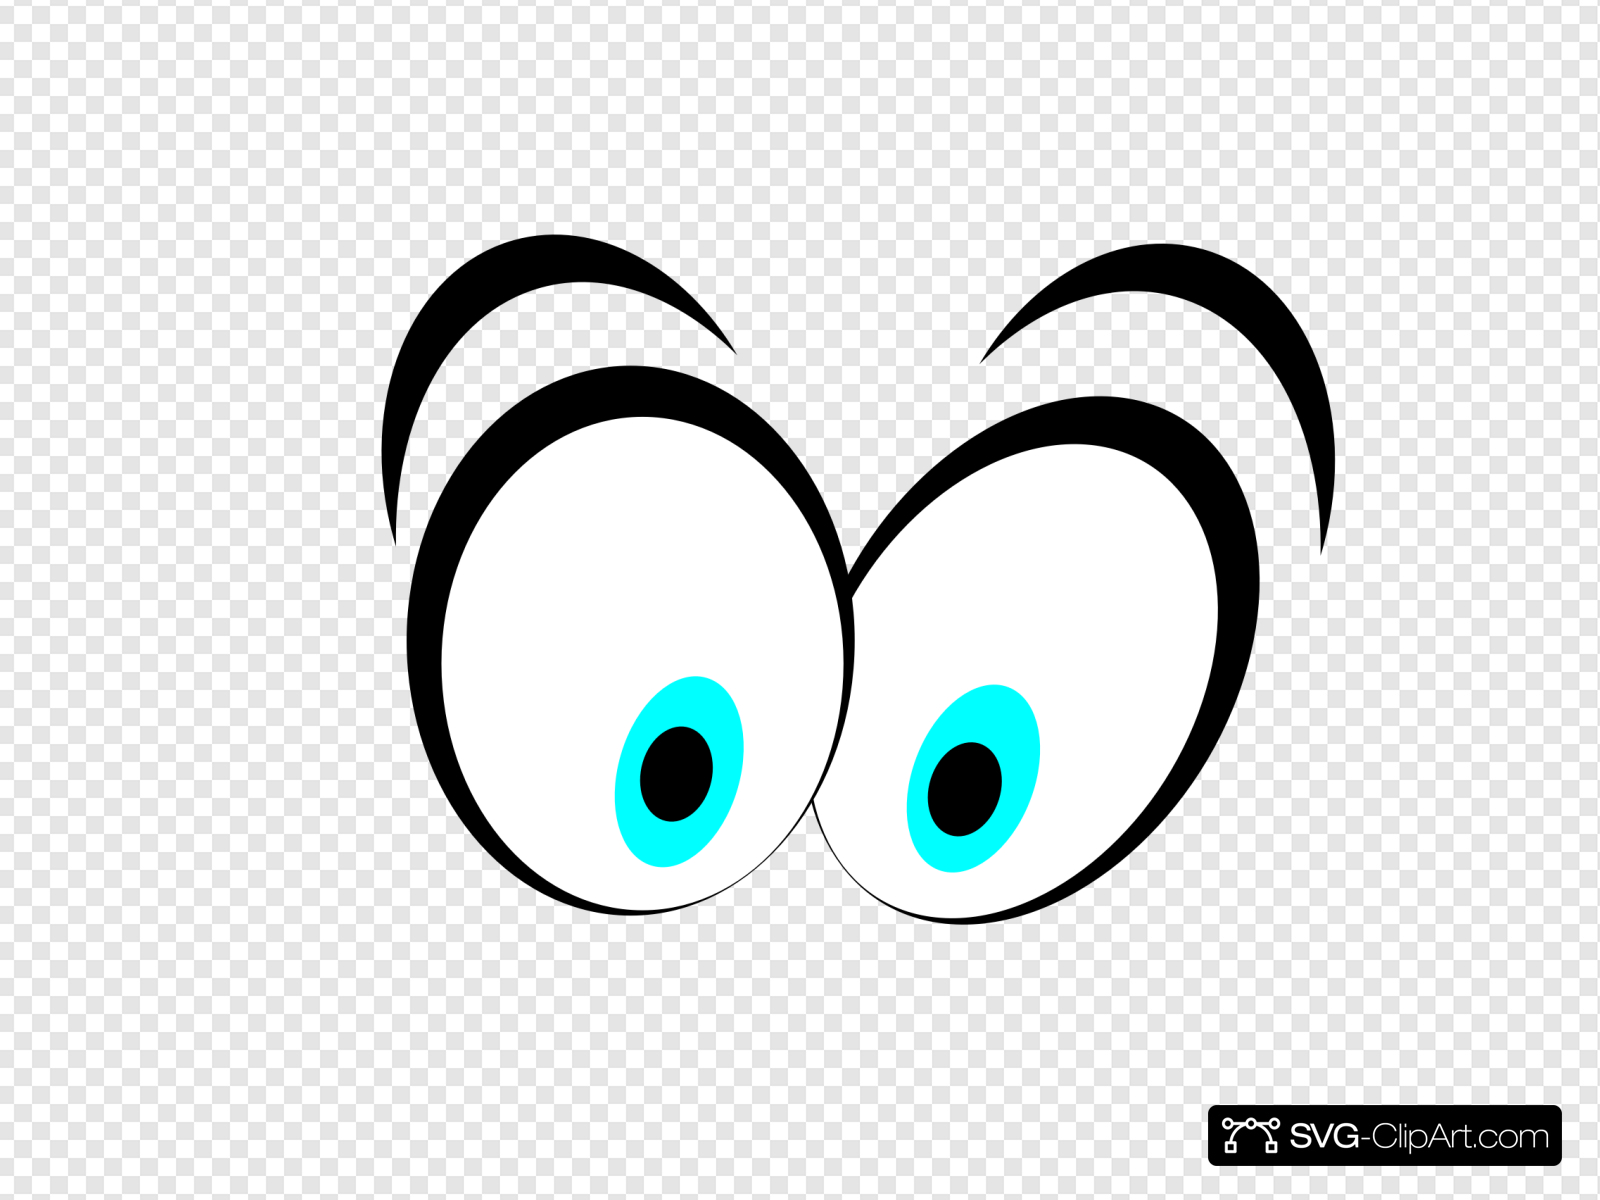 Animated Blue Cartoon Eyes Clip art, Icon and SVG.